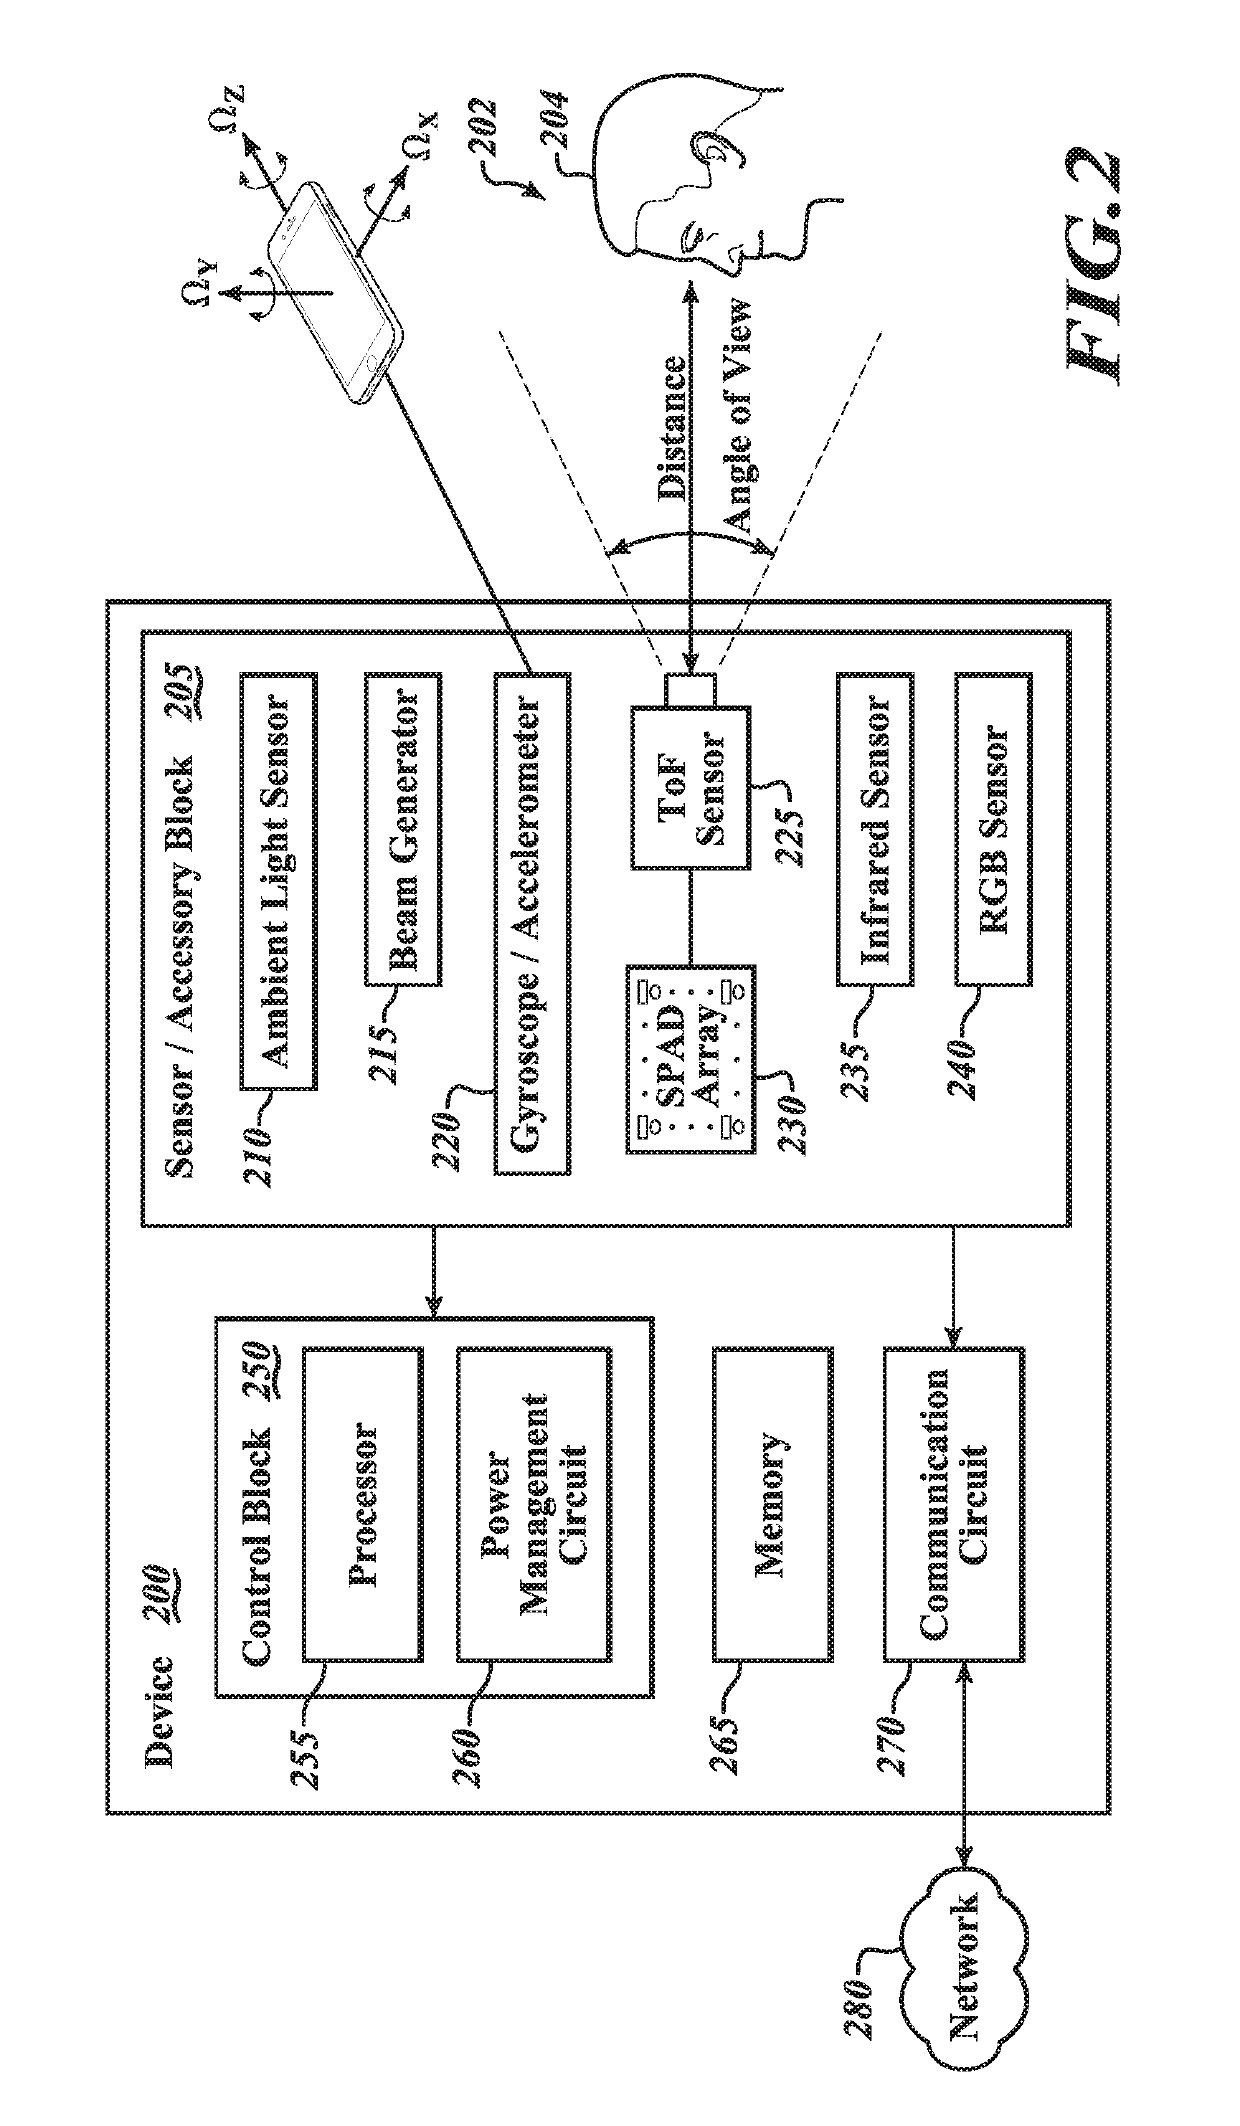 Facial authentication systems and methods utilizing time of flight sensing